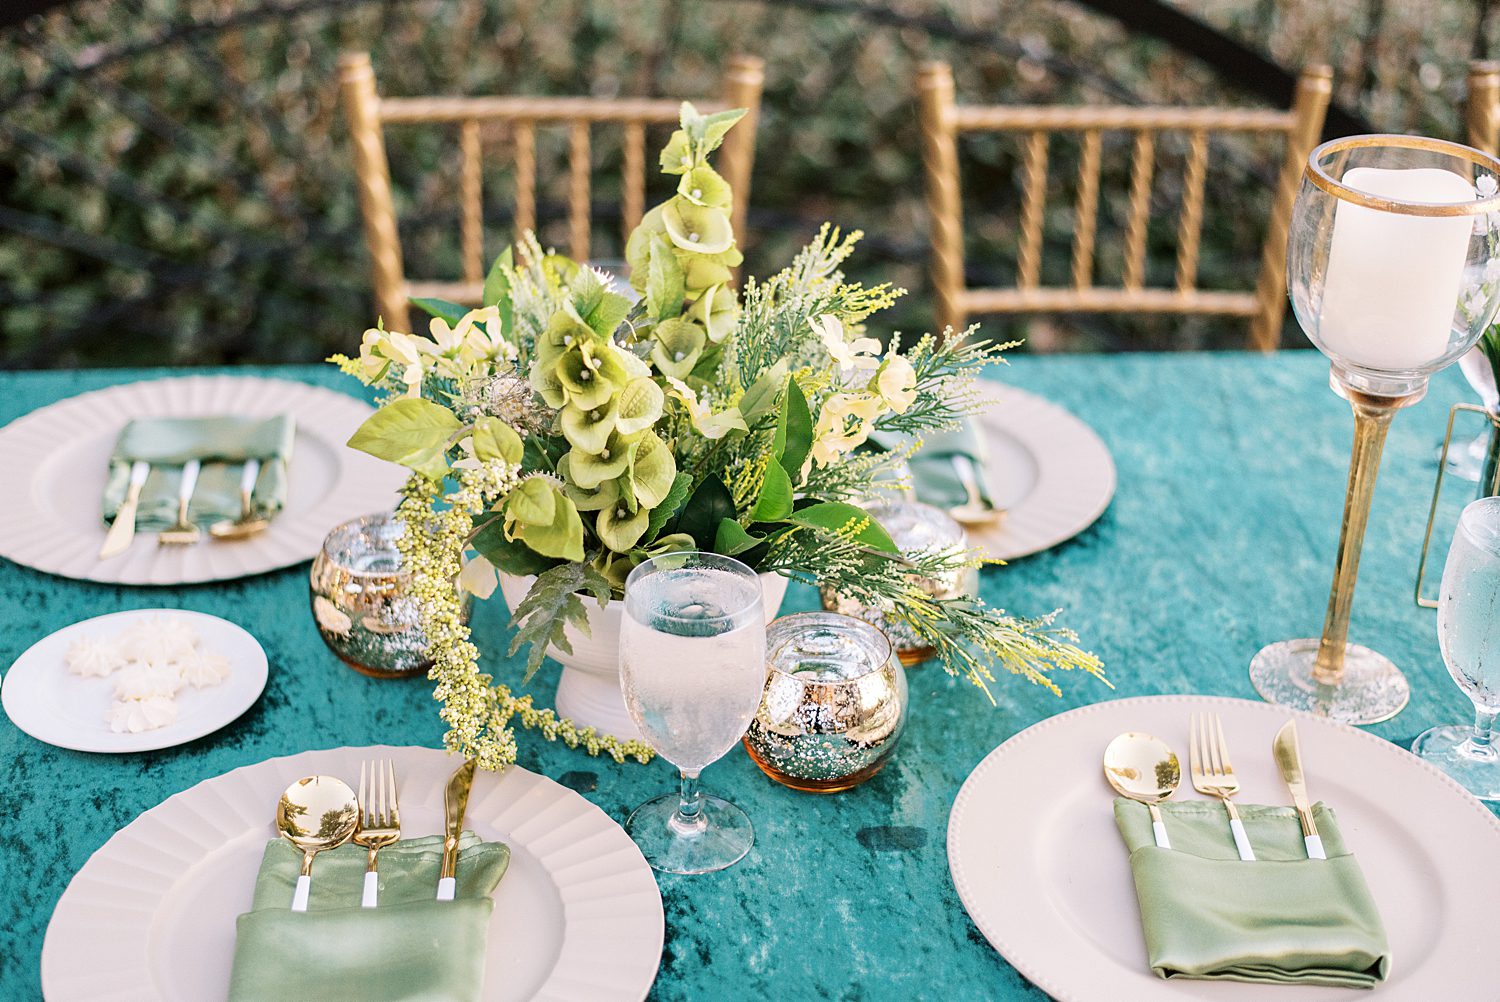 place setting on teal table cloth with mint napkins at The Bibb Mill Event Center